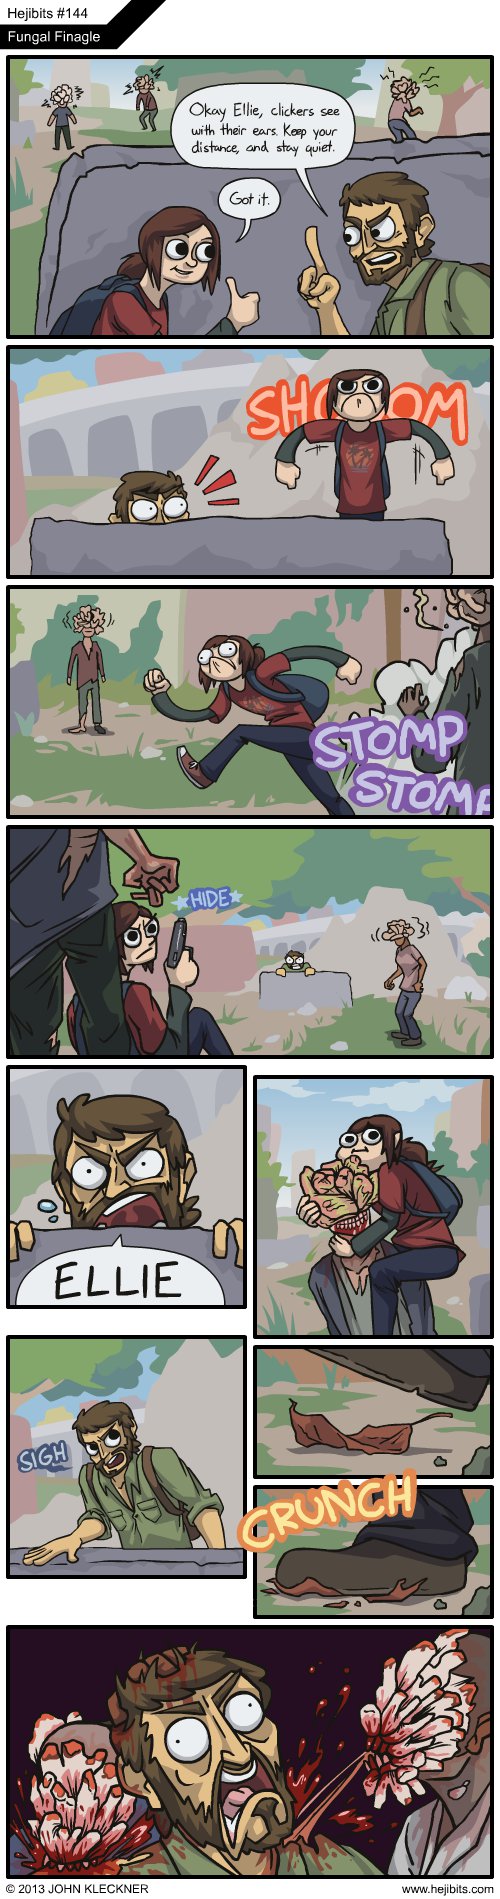 The Last of Us in a nutshell